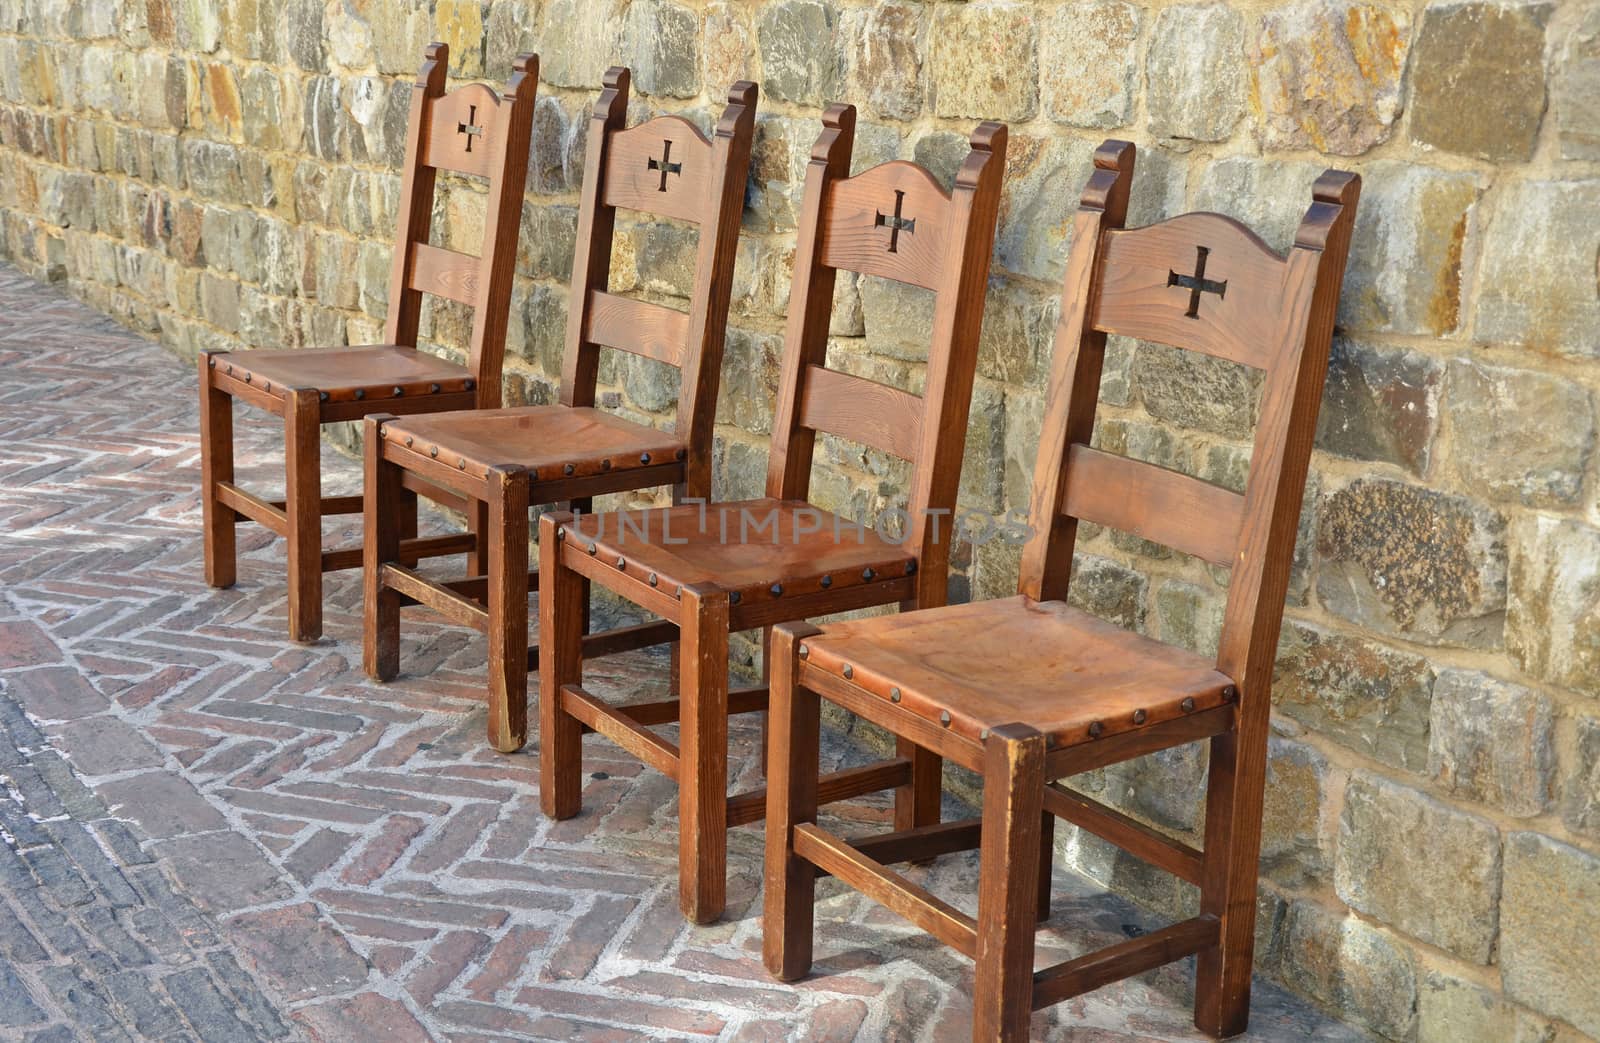 Medieval style chairs on brick patio